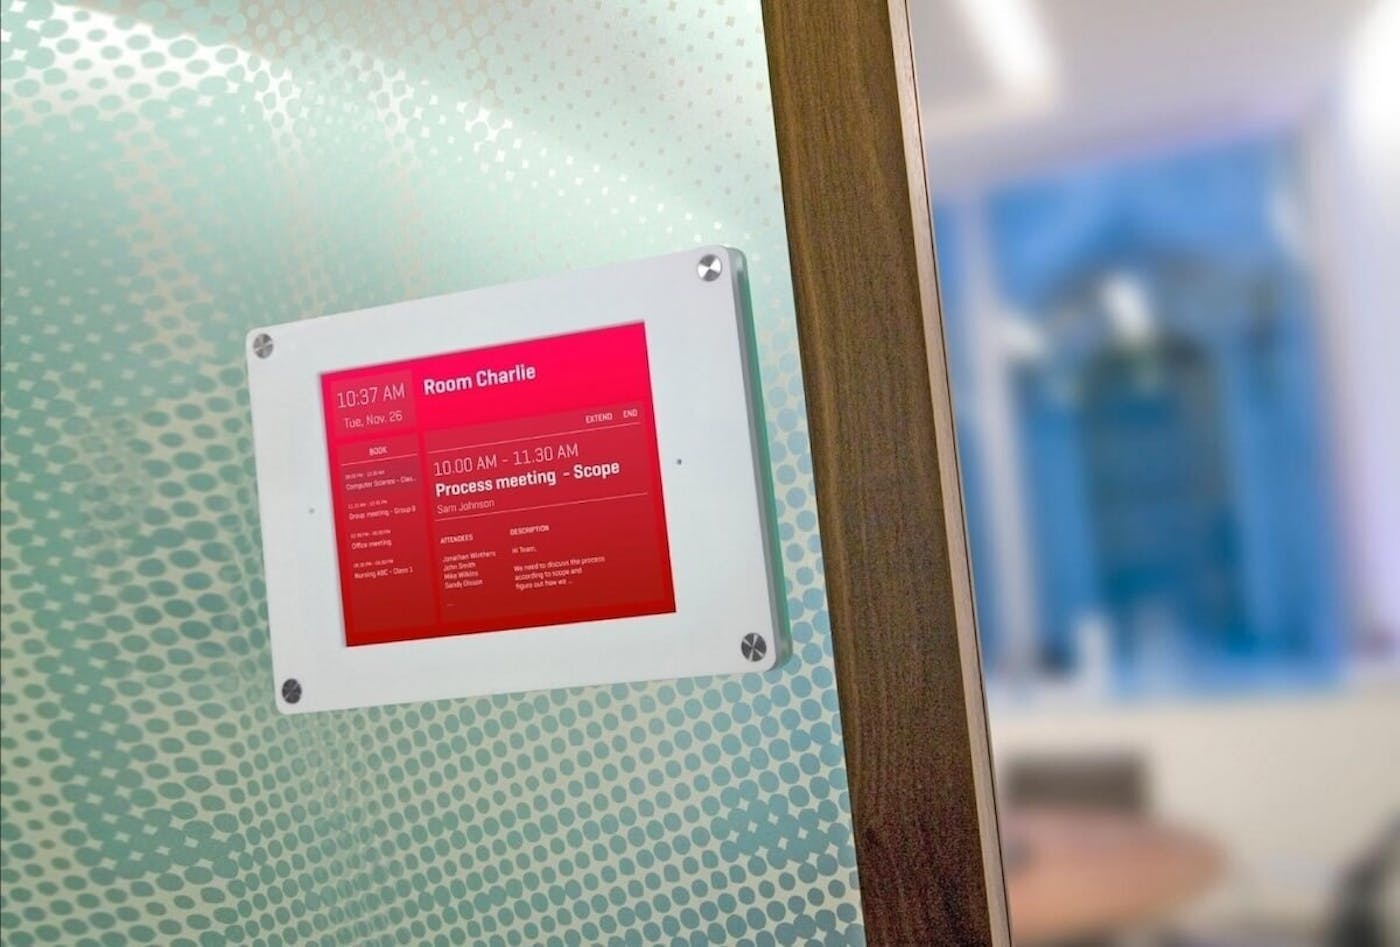 ScreenCloud Article - How to Create Great Office Wayfinding